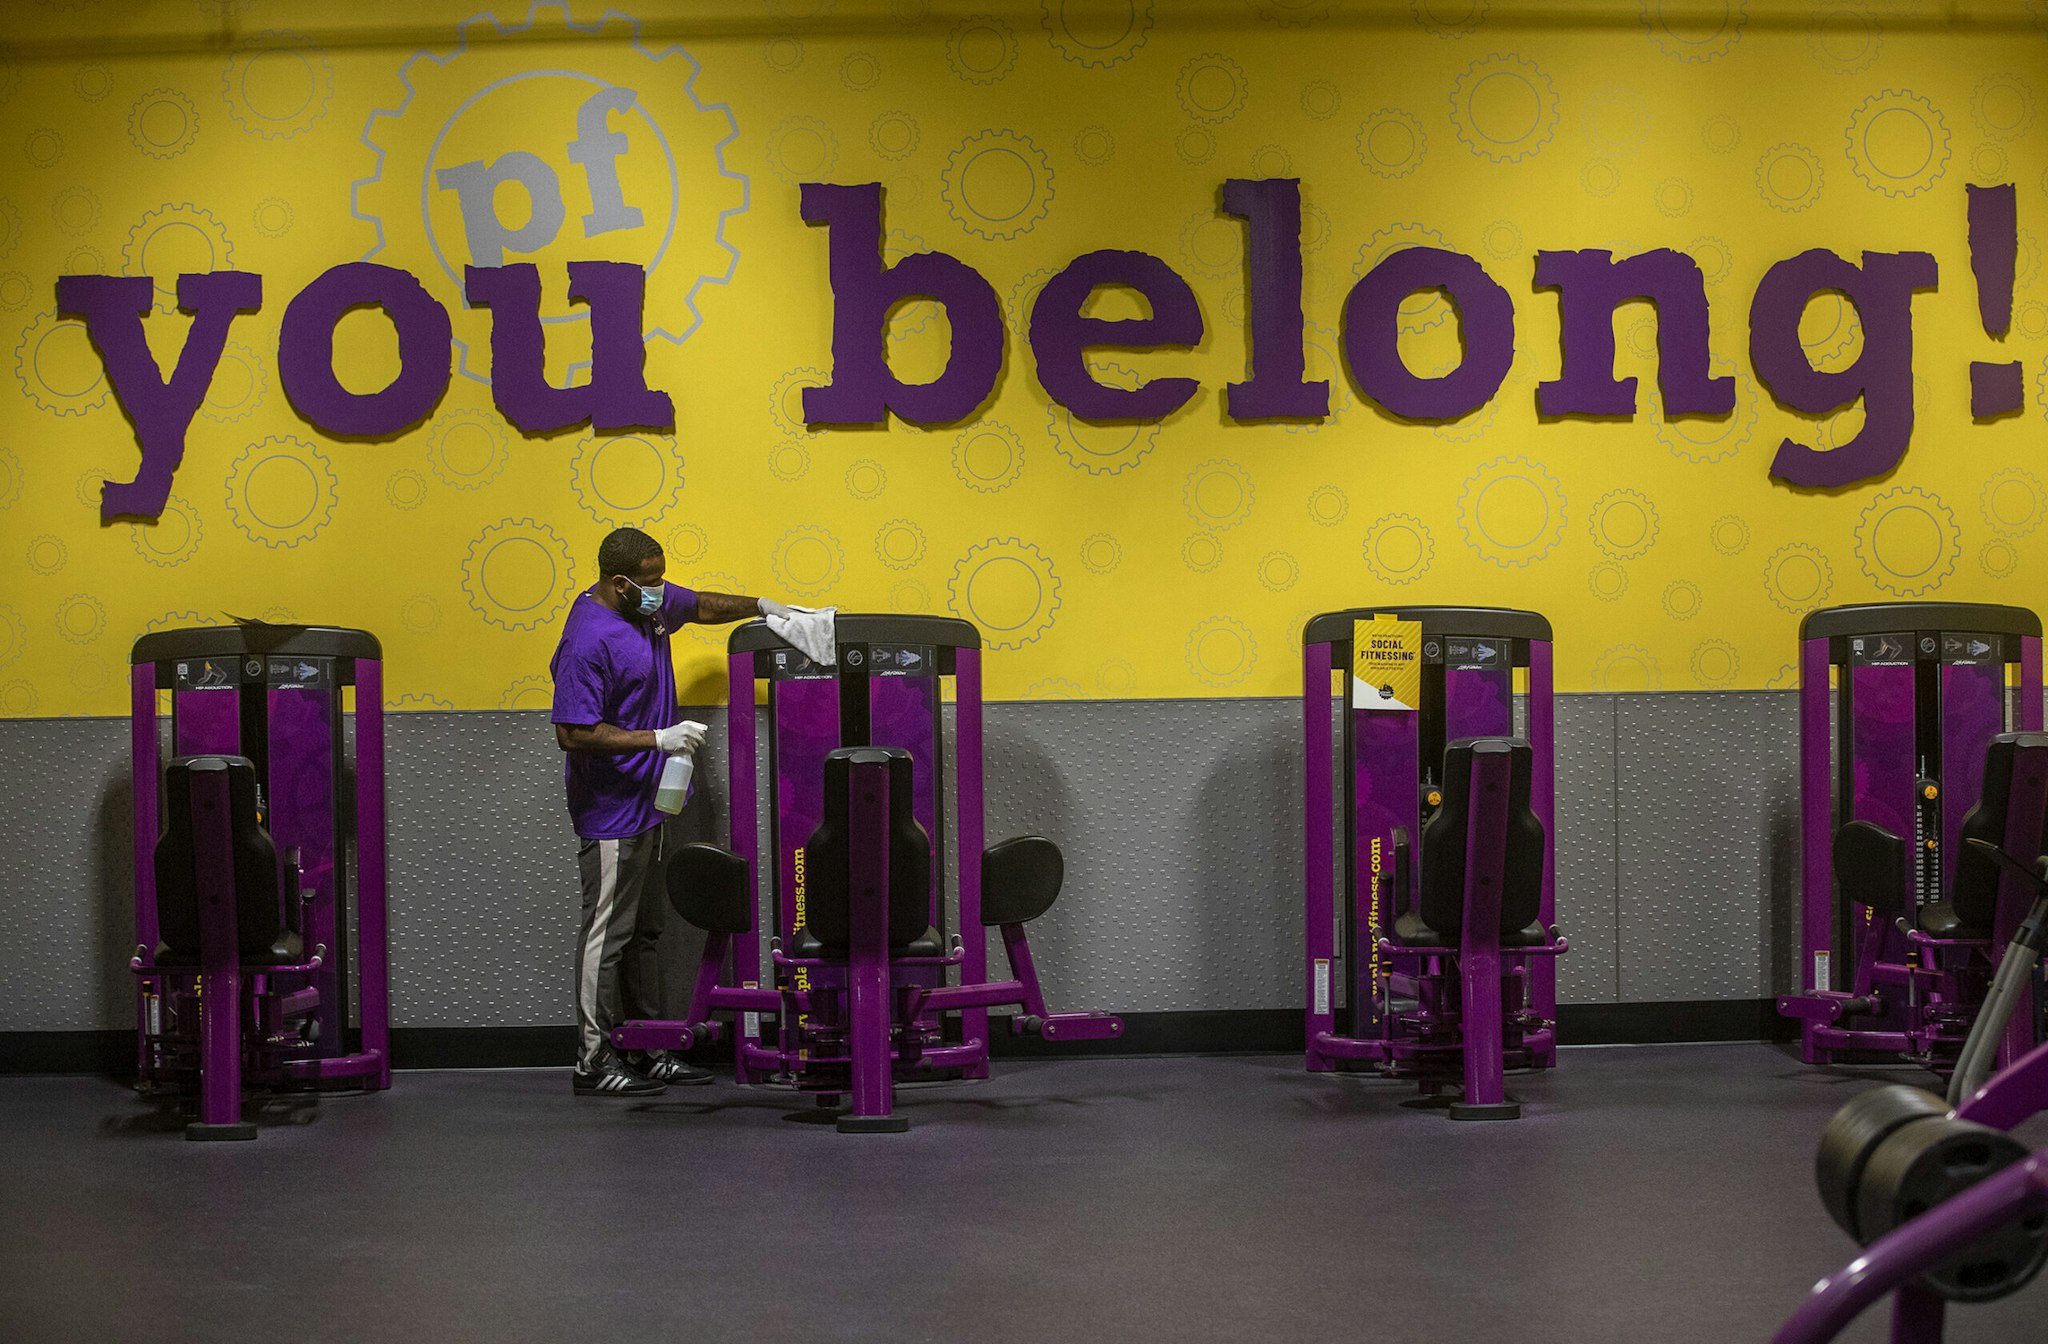 INGLEWOOD, CA - MARCH 15: Anthony Carthan, an employee at Planet Fitness on Imperial Highway in Inglewood, disinfects exercise equipment while helping to prepare the fitness center for their re-opening tomorrow morning at 5am after being closed since July of 2020. Exercise equipment is spaced apart to ensure social distancing and the new guidelines allow for a maximum of 10 percent of capacity.